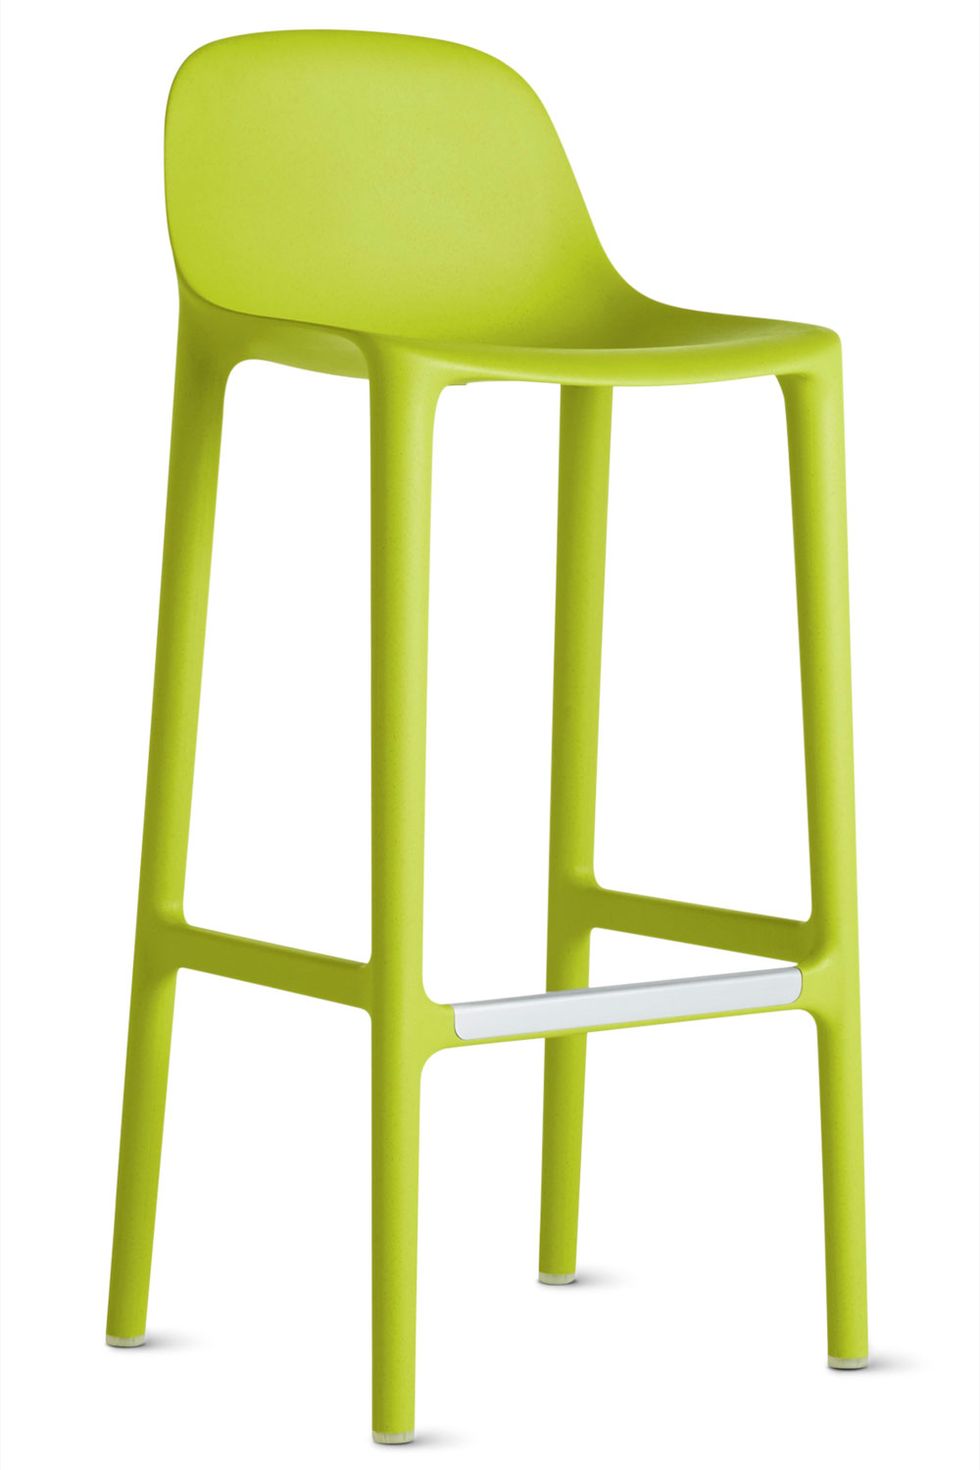 Green, Yellow, Product, Line, Chair, Parallel, Plastic, 